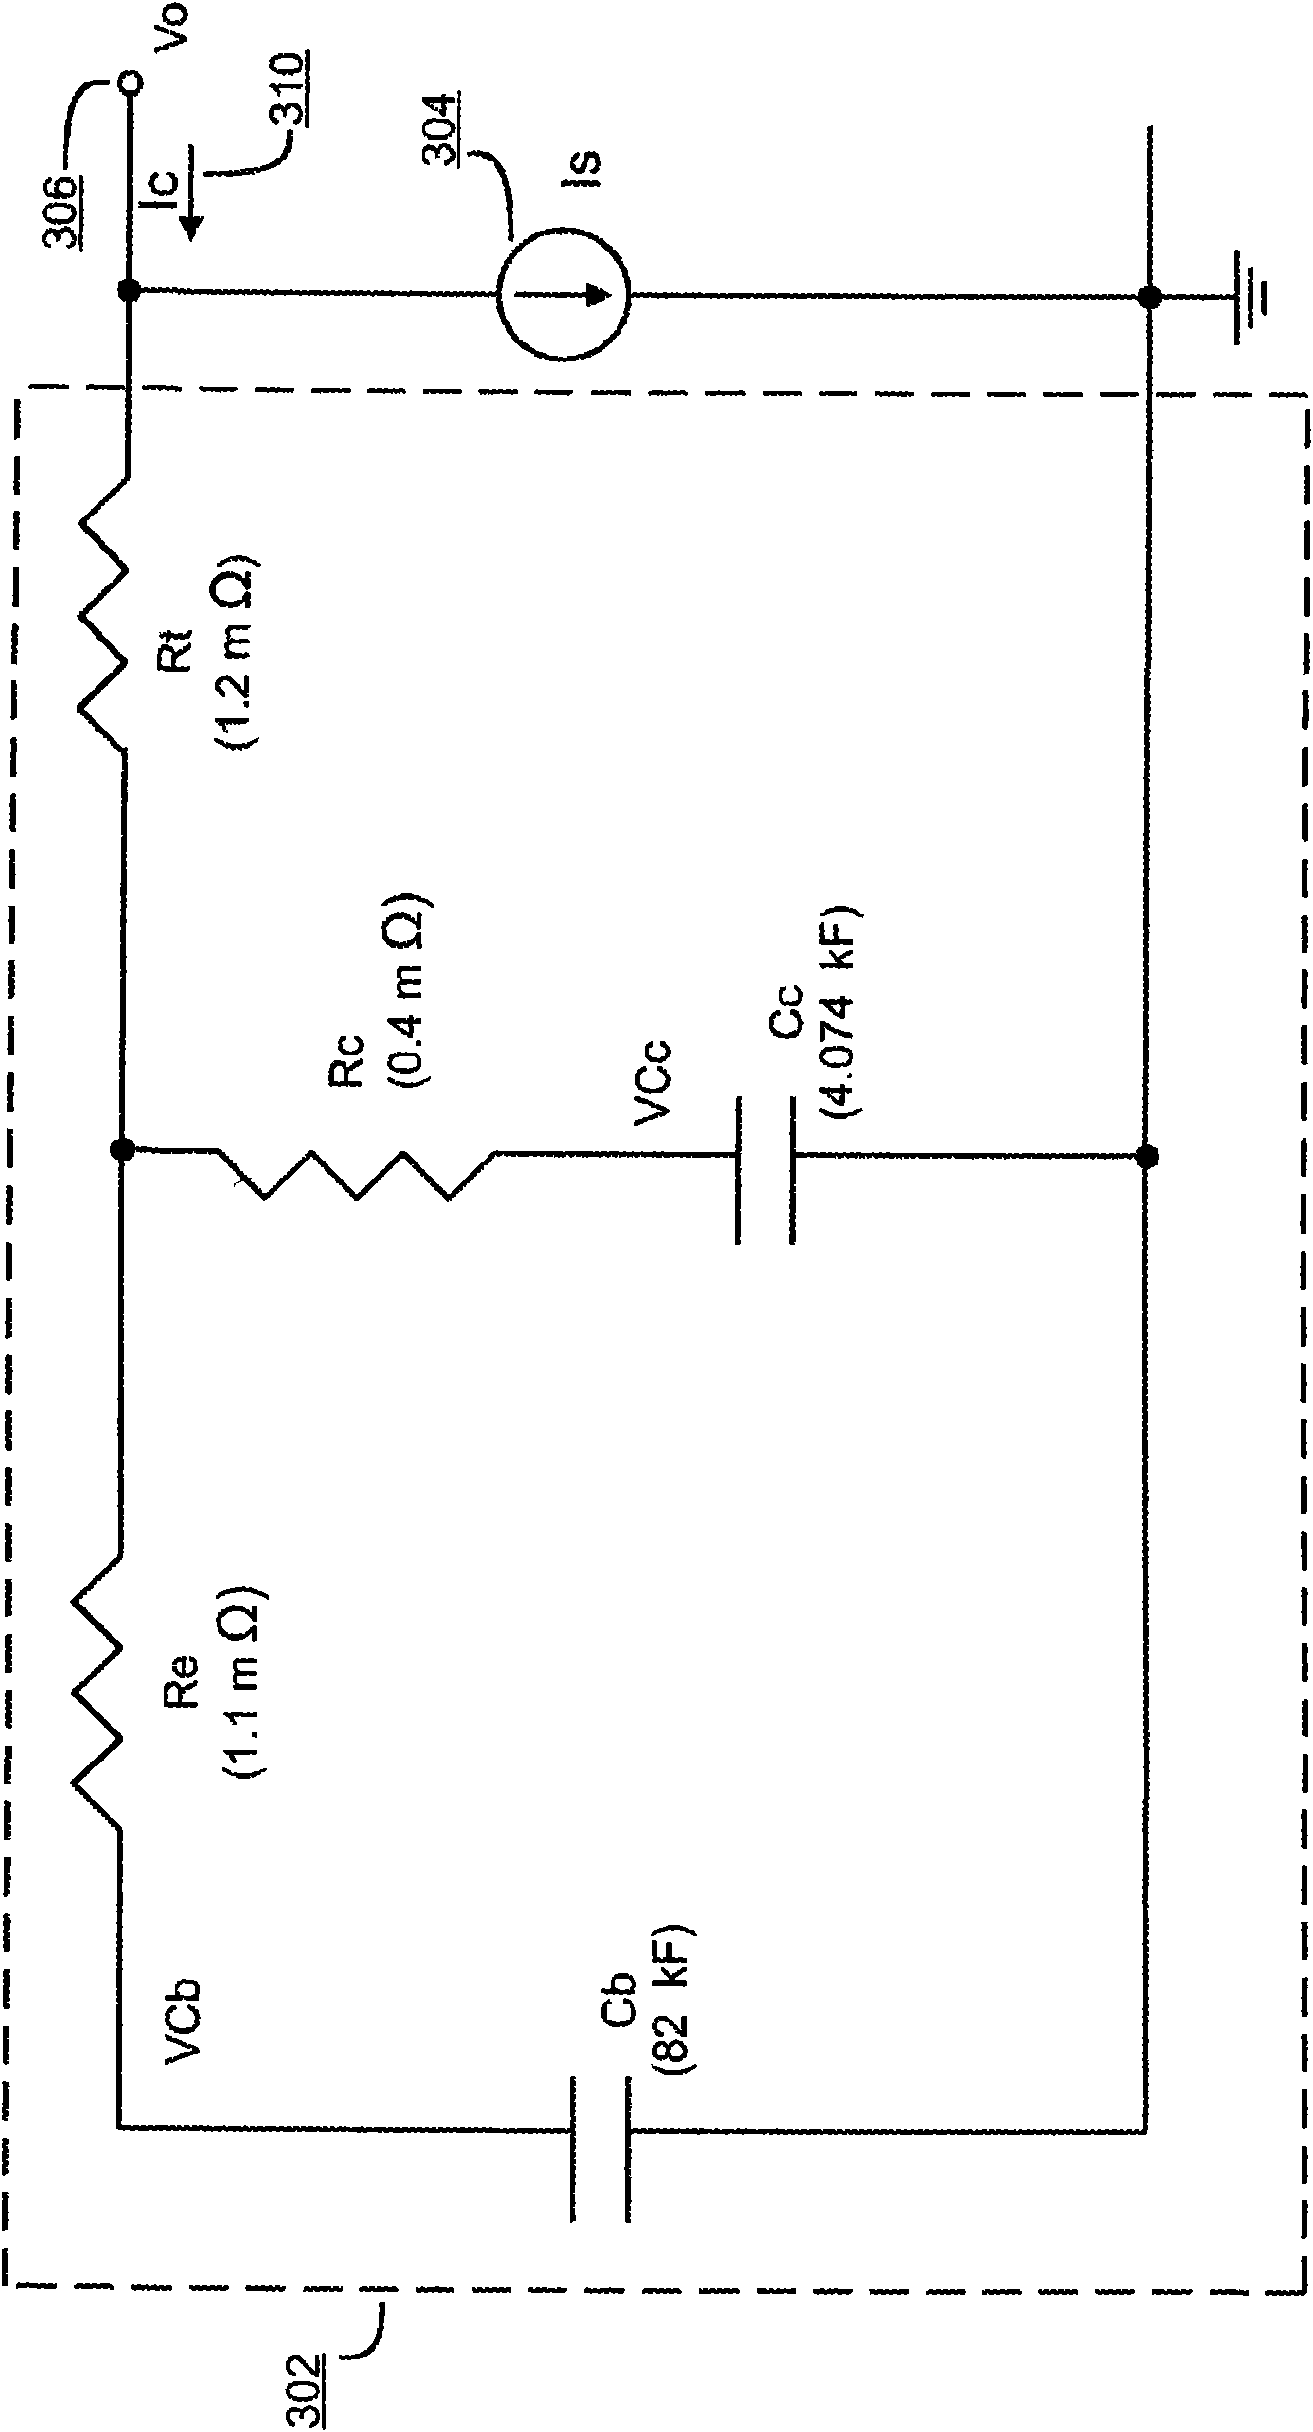 Method for charging a battery using a constant current adapted to provide a constant rate of change of open circuit battery voltage